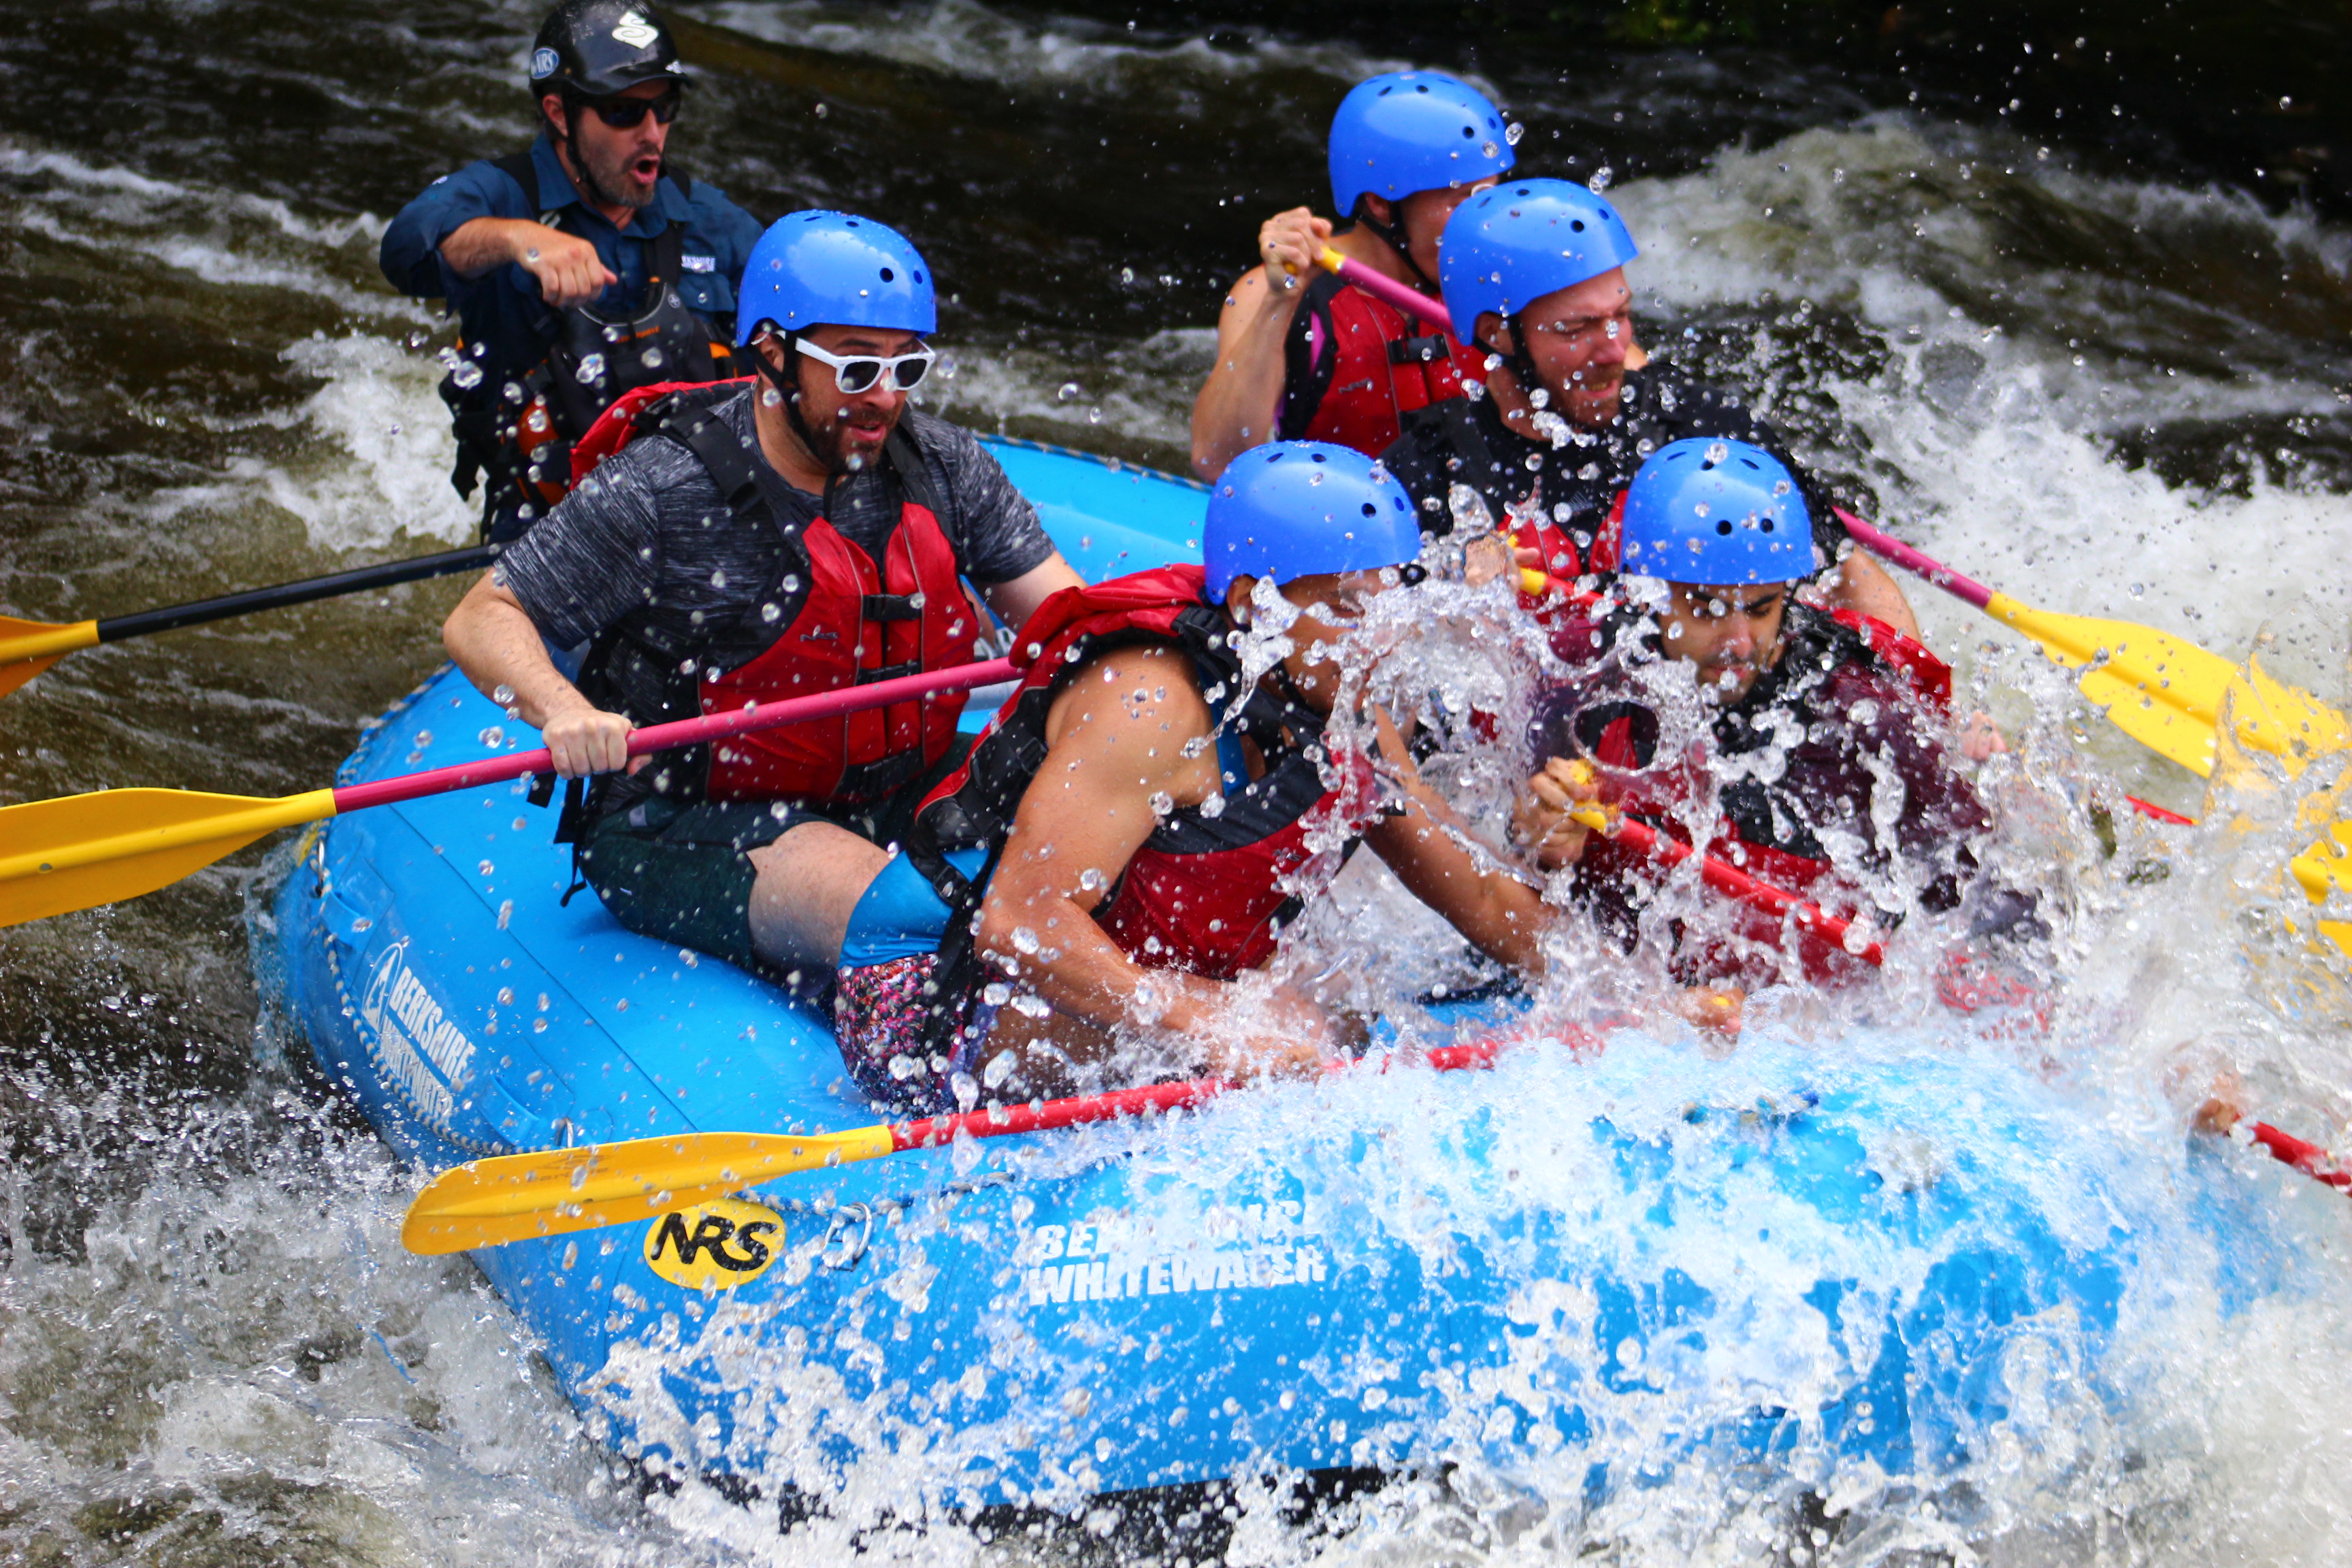 Get Out and Trek members rafting down the Deerfield River, Massachusetts. [Photo] Courtesy of GOAT